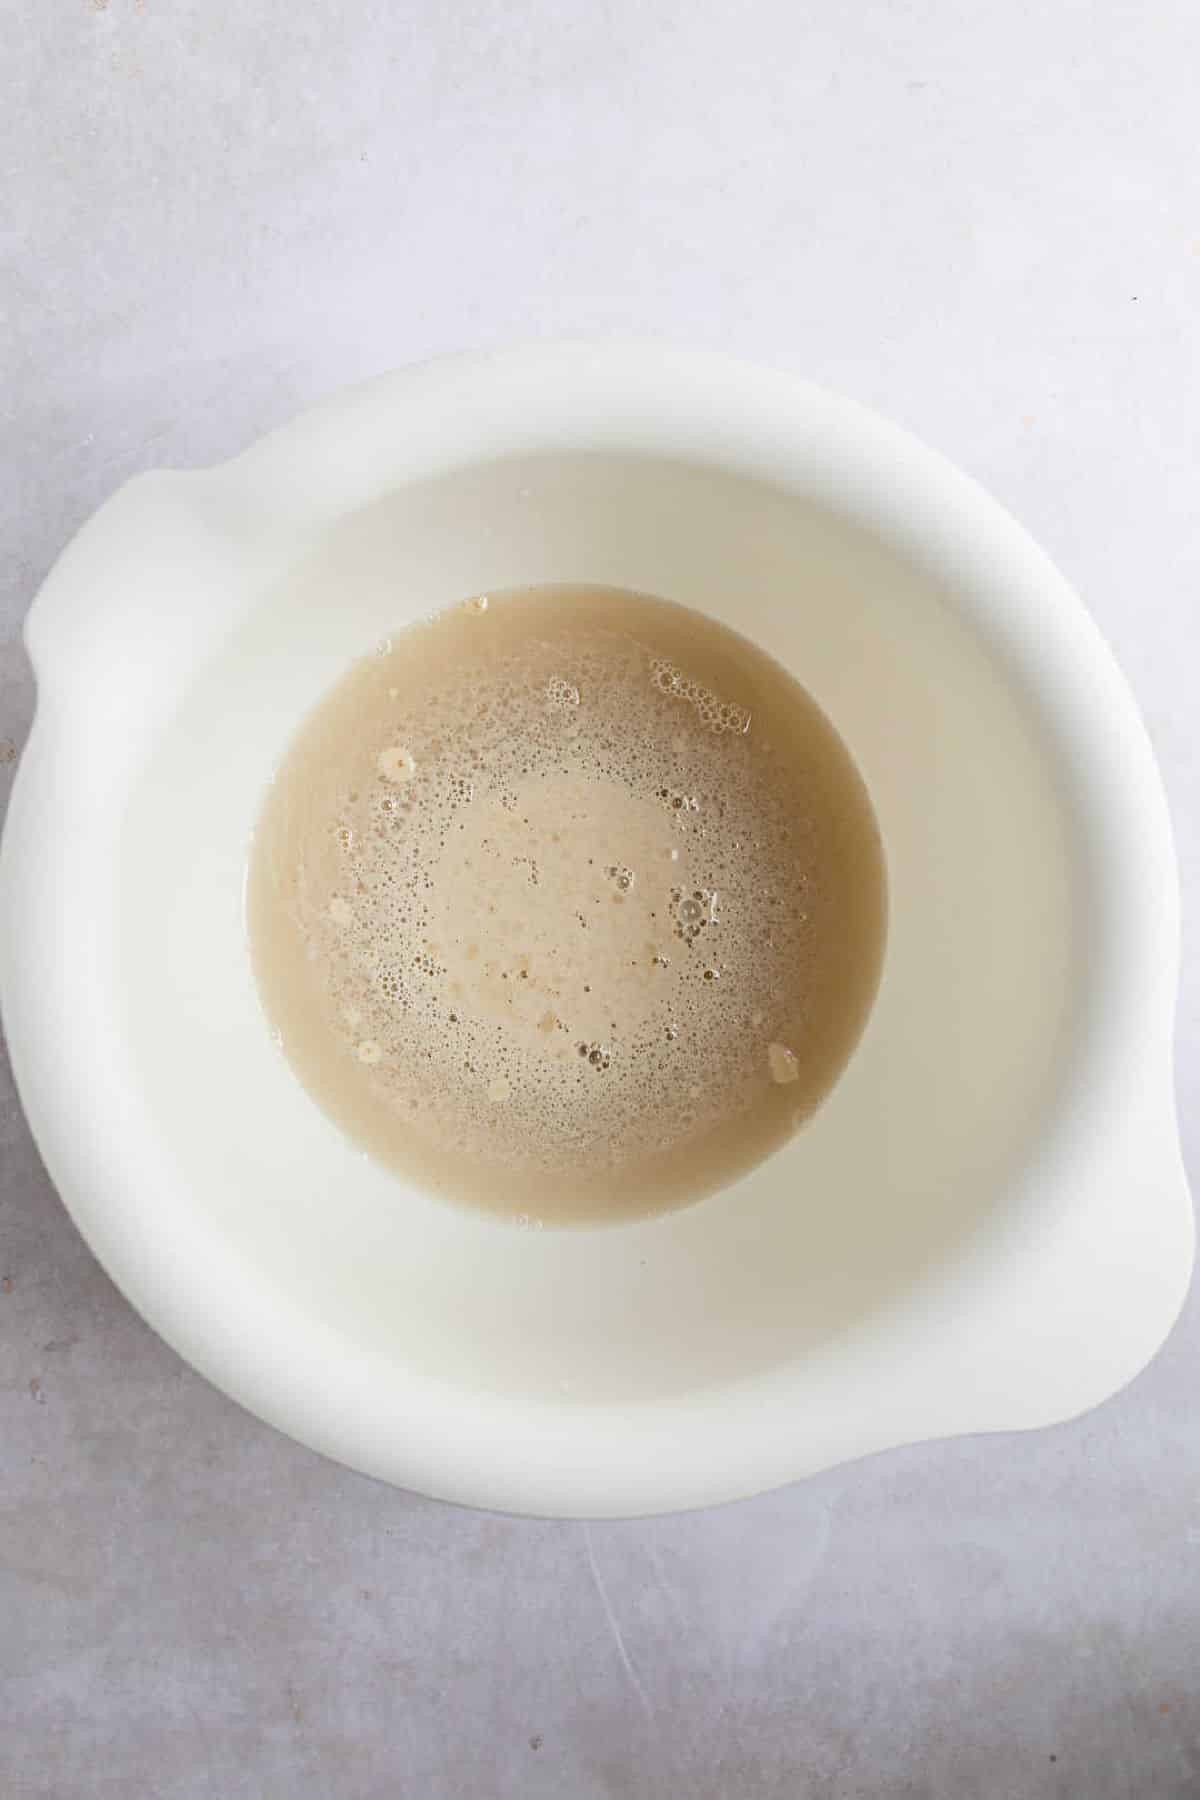 Proofed yeast in a mixing bowl. 